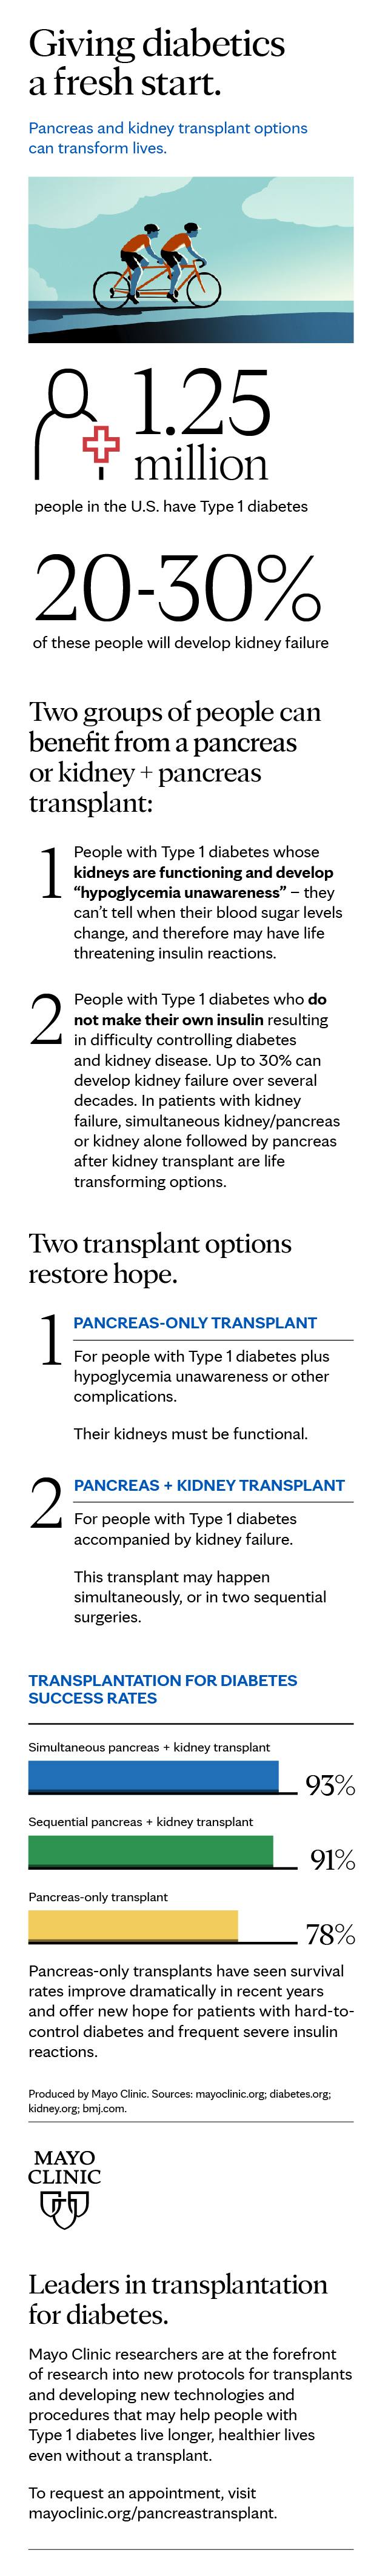 Infographic for pancreas and kidney transplant